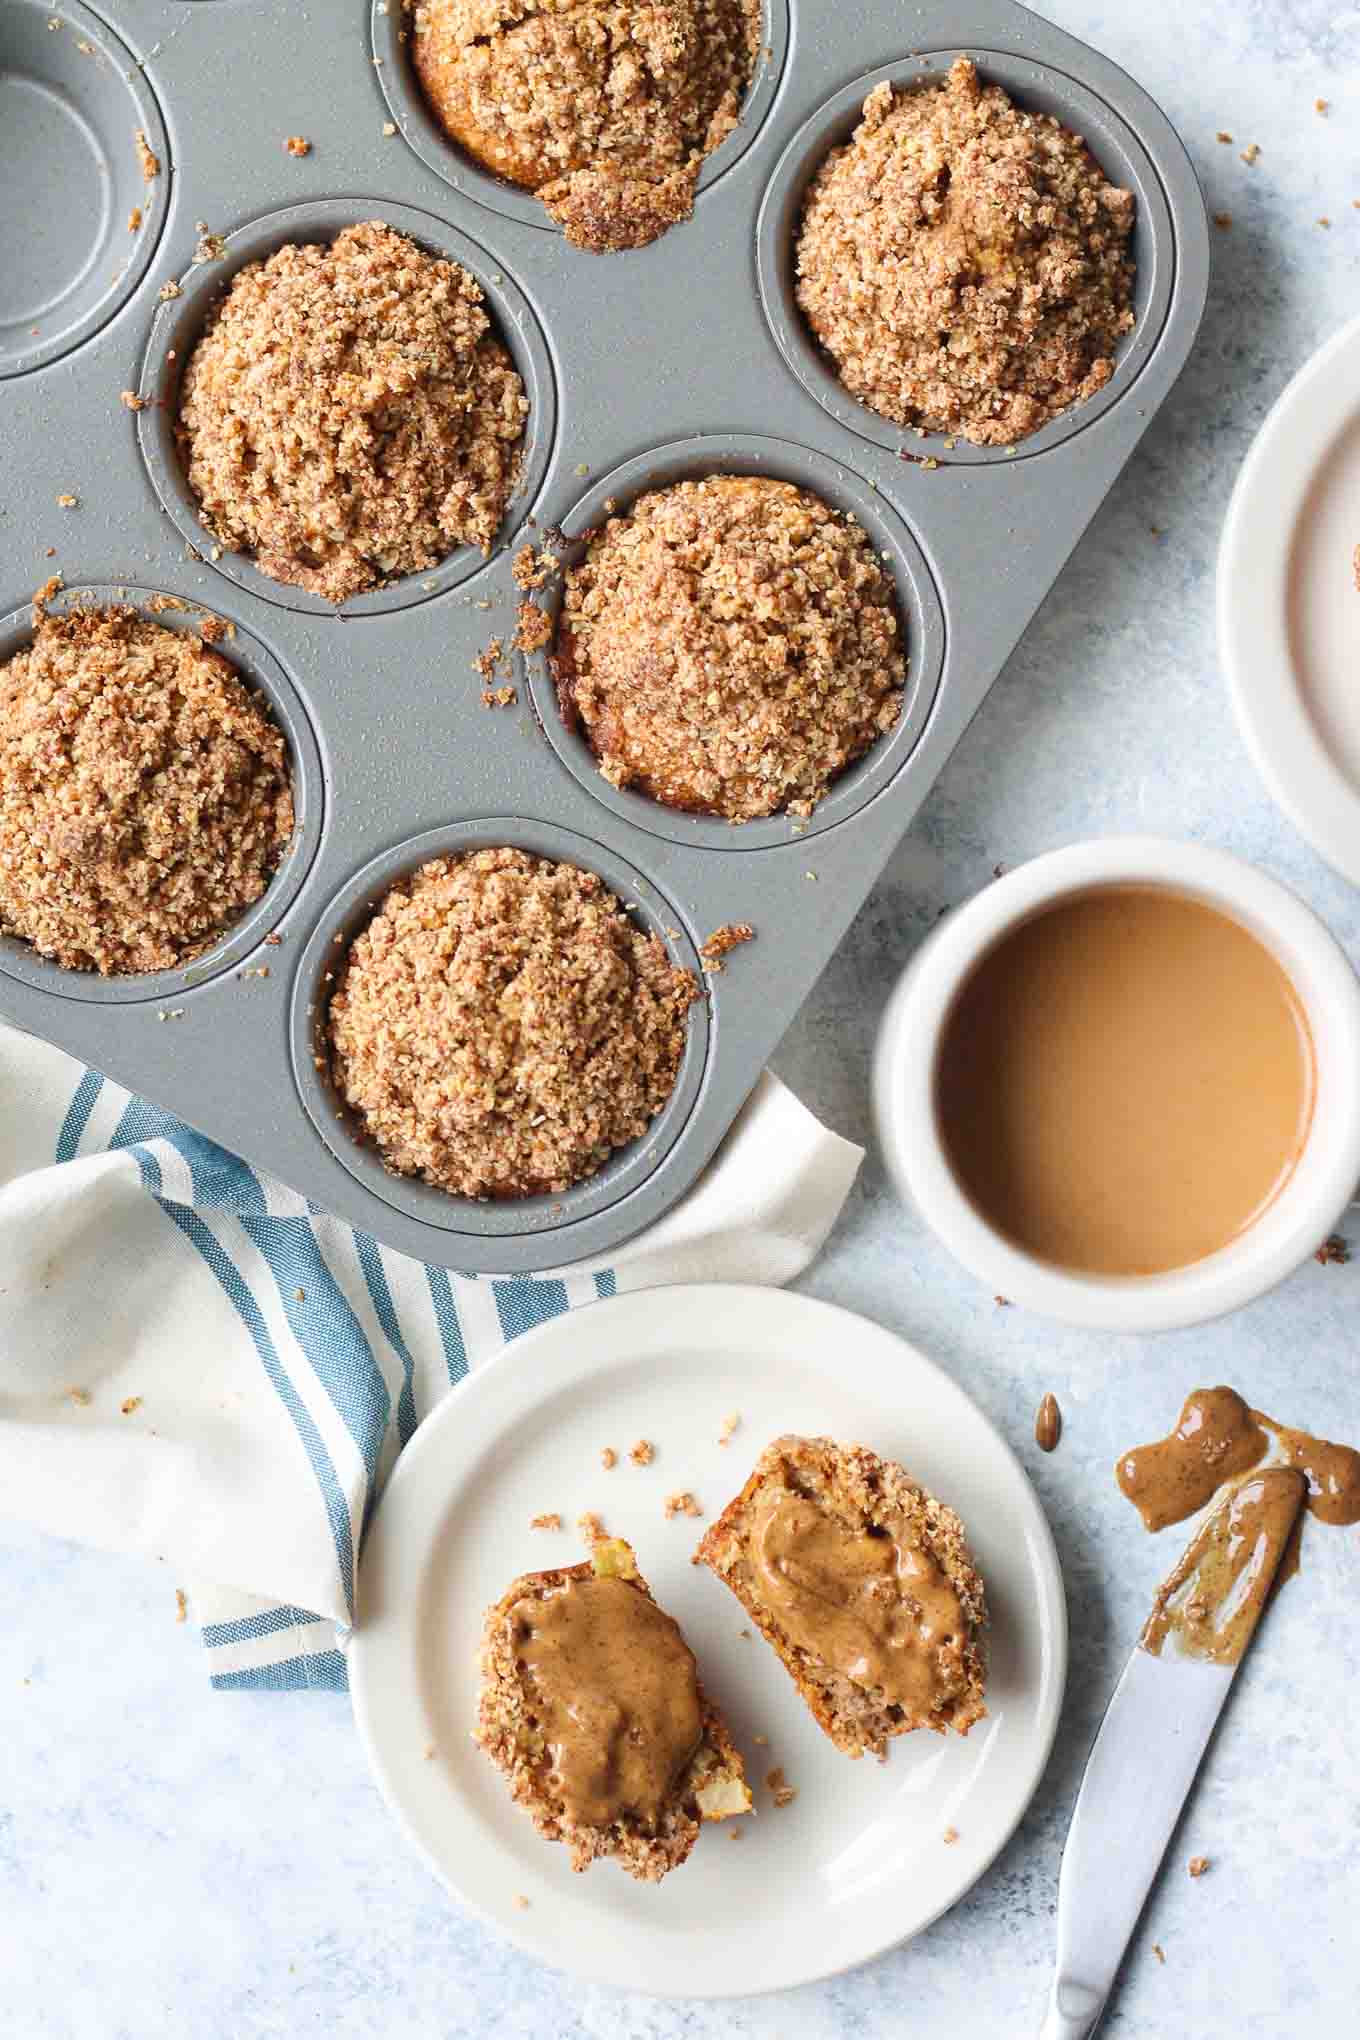 Muffins in the tin with a cup of coffee and almond butter spread on a single muffin